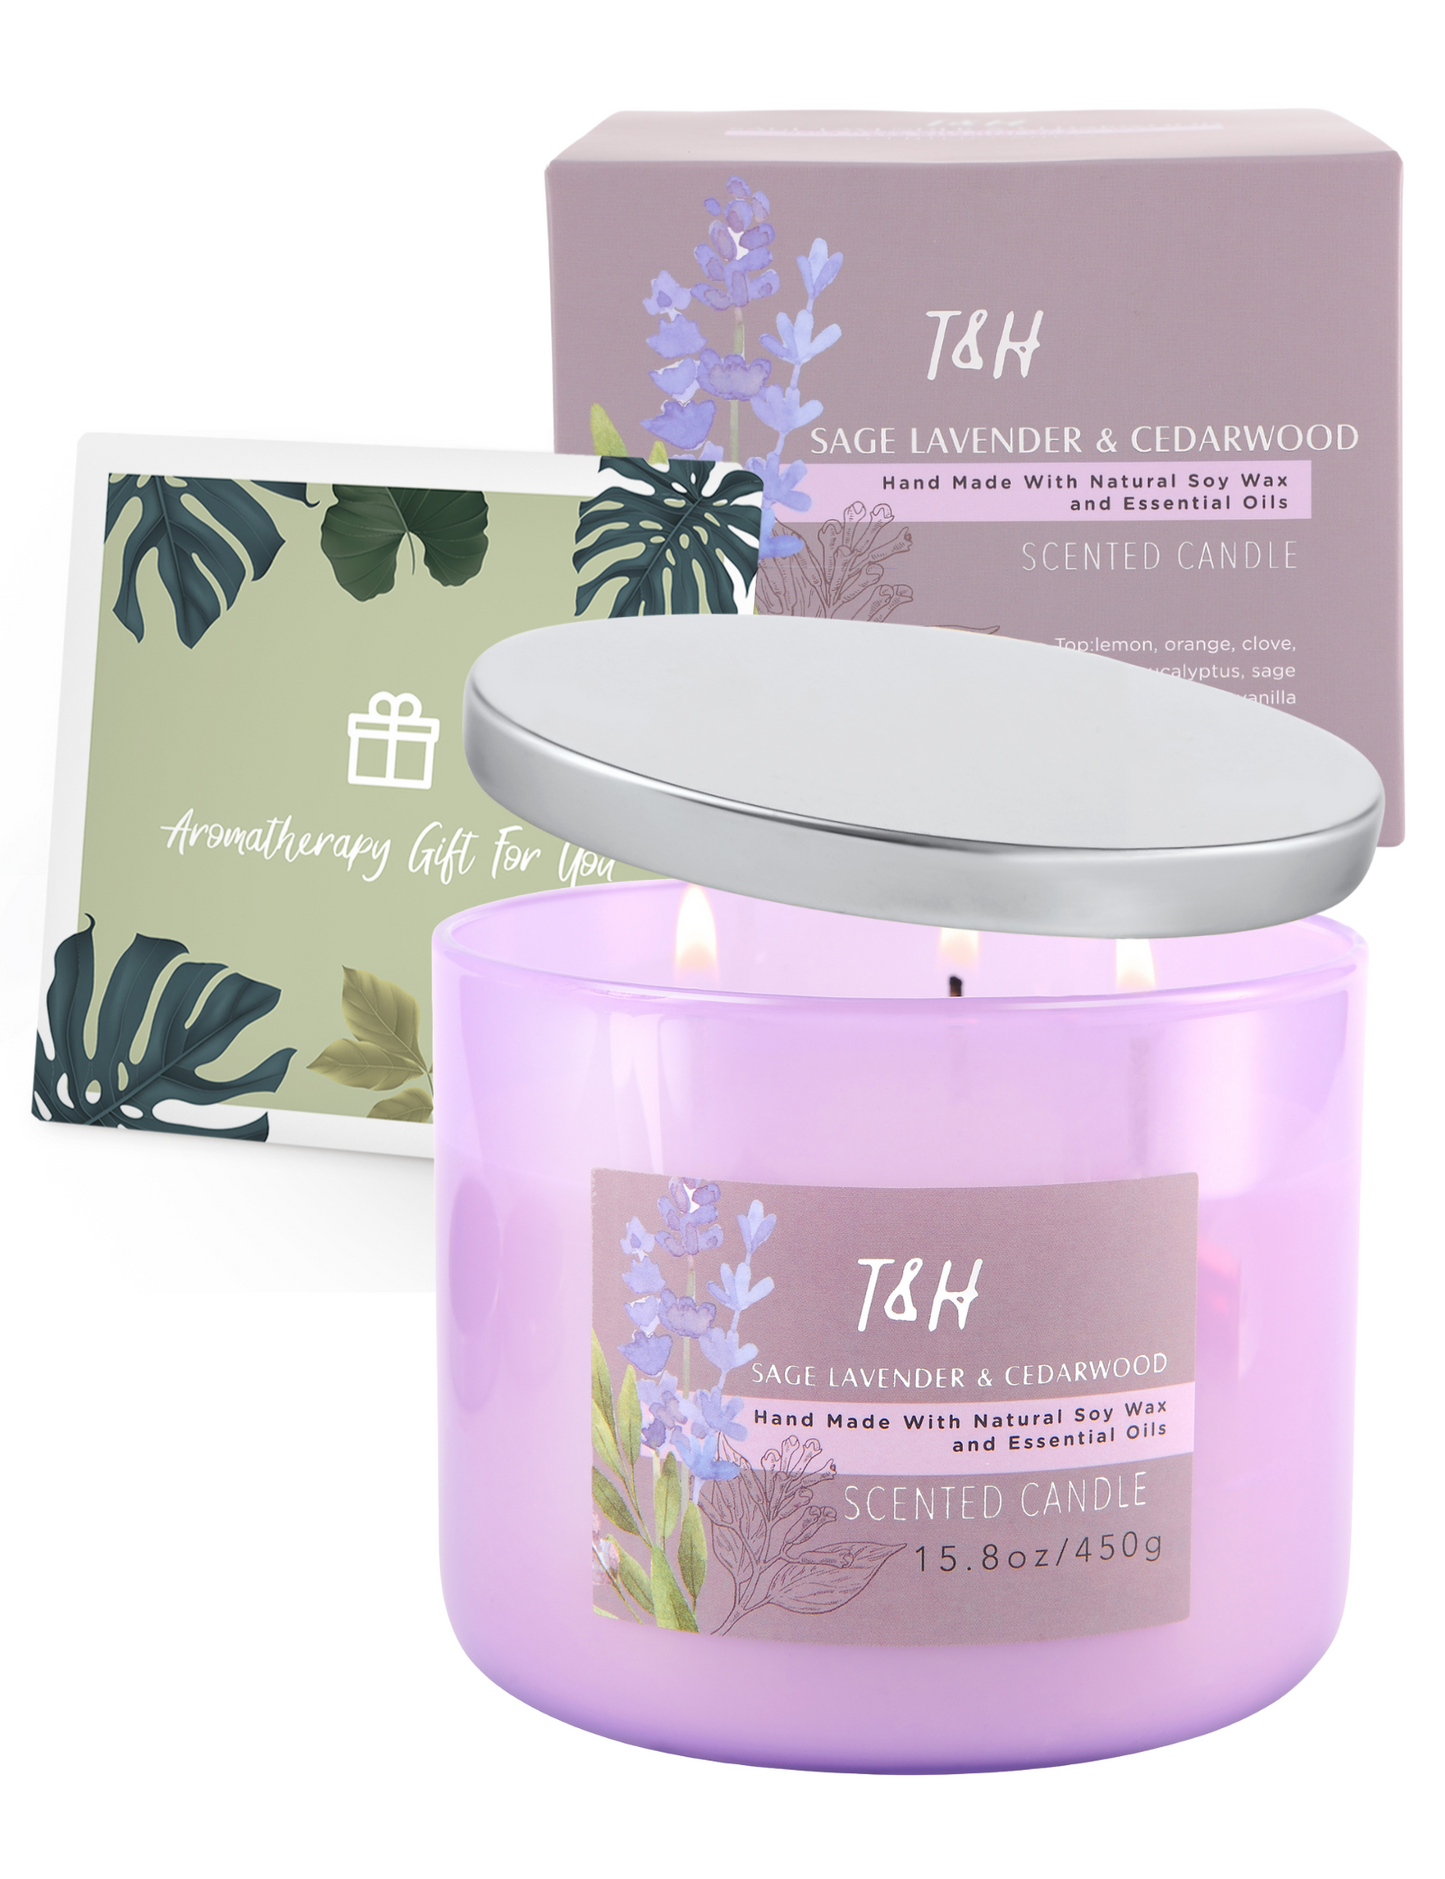 Sage Lavender & Cedarwood Scented Soy Candle 3-Wick